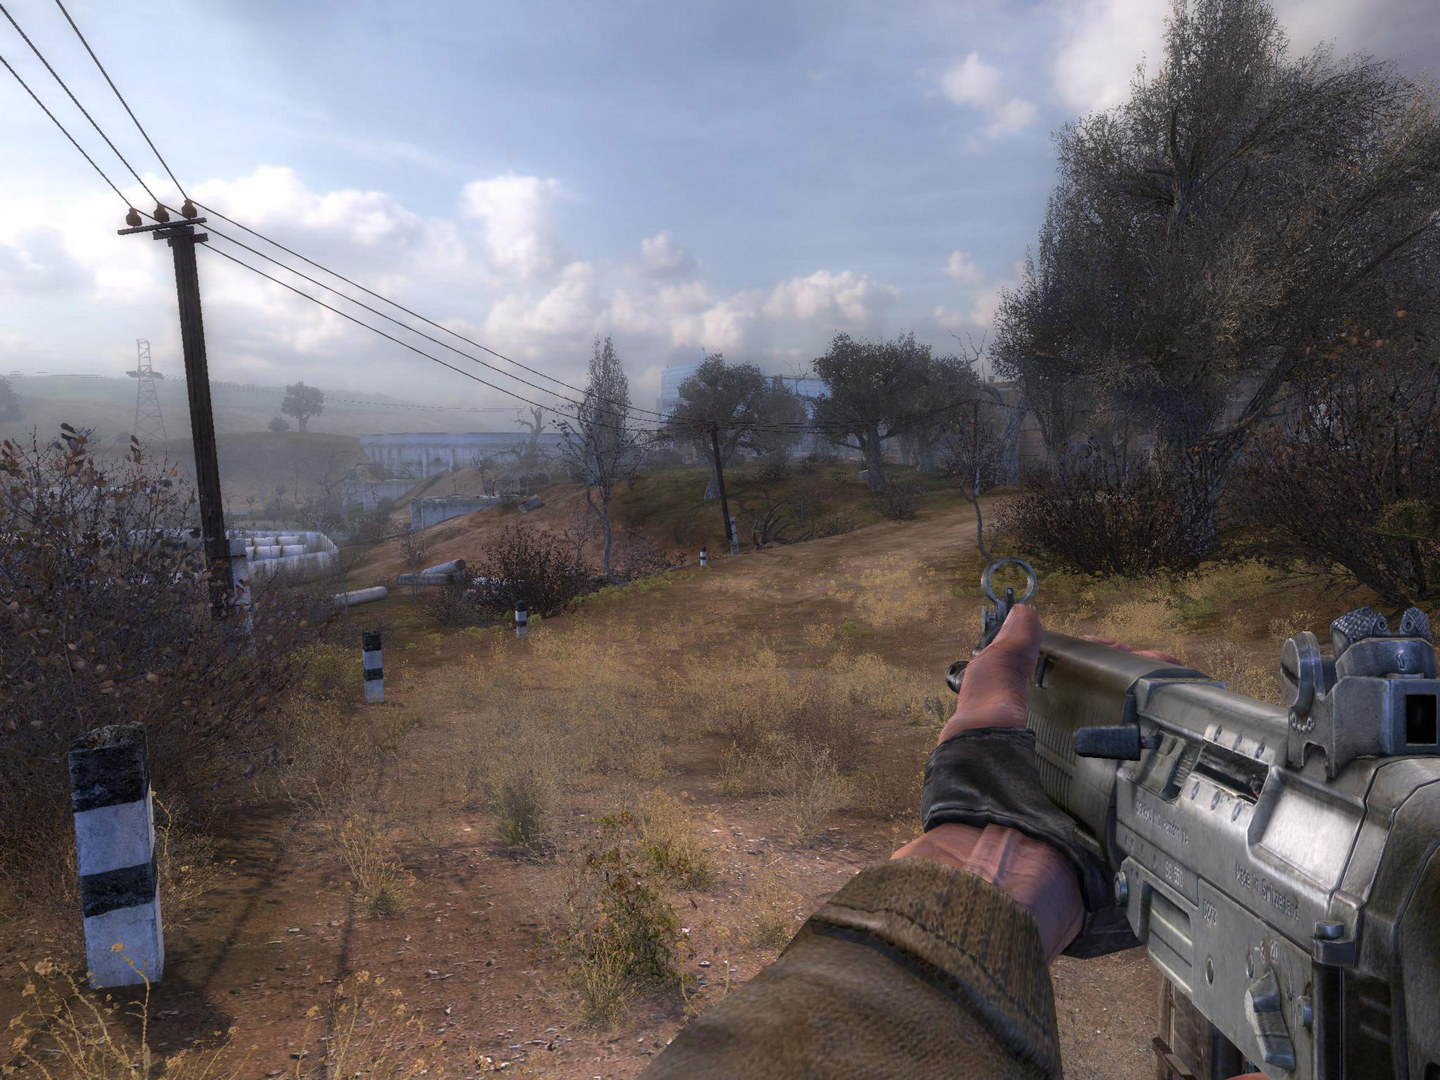 Screenshot of Stalker Shadow of Chernobyl in first person. The character is holding a gun and waling through an outdoor area with trees and power lines